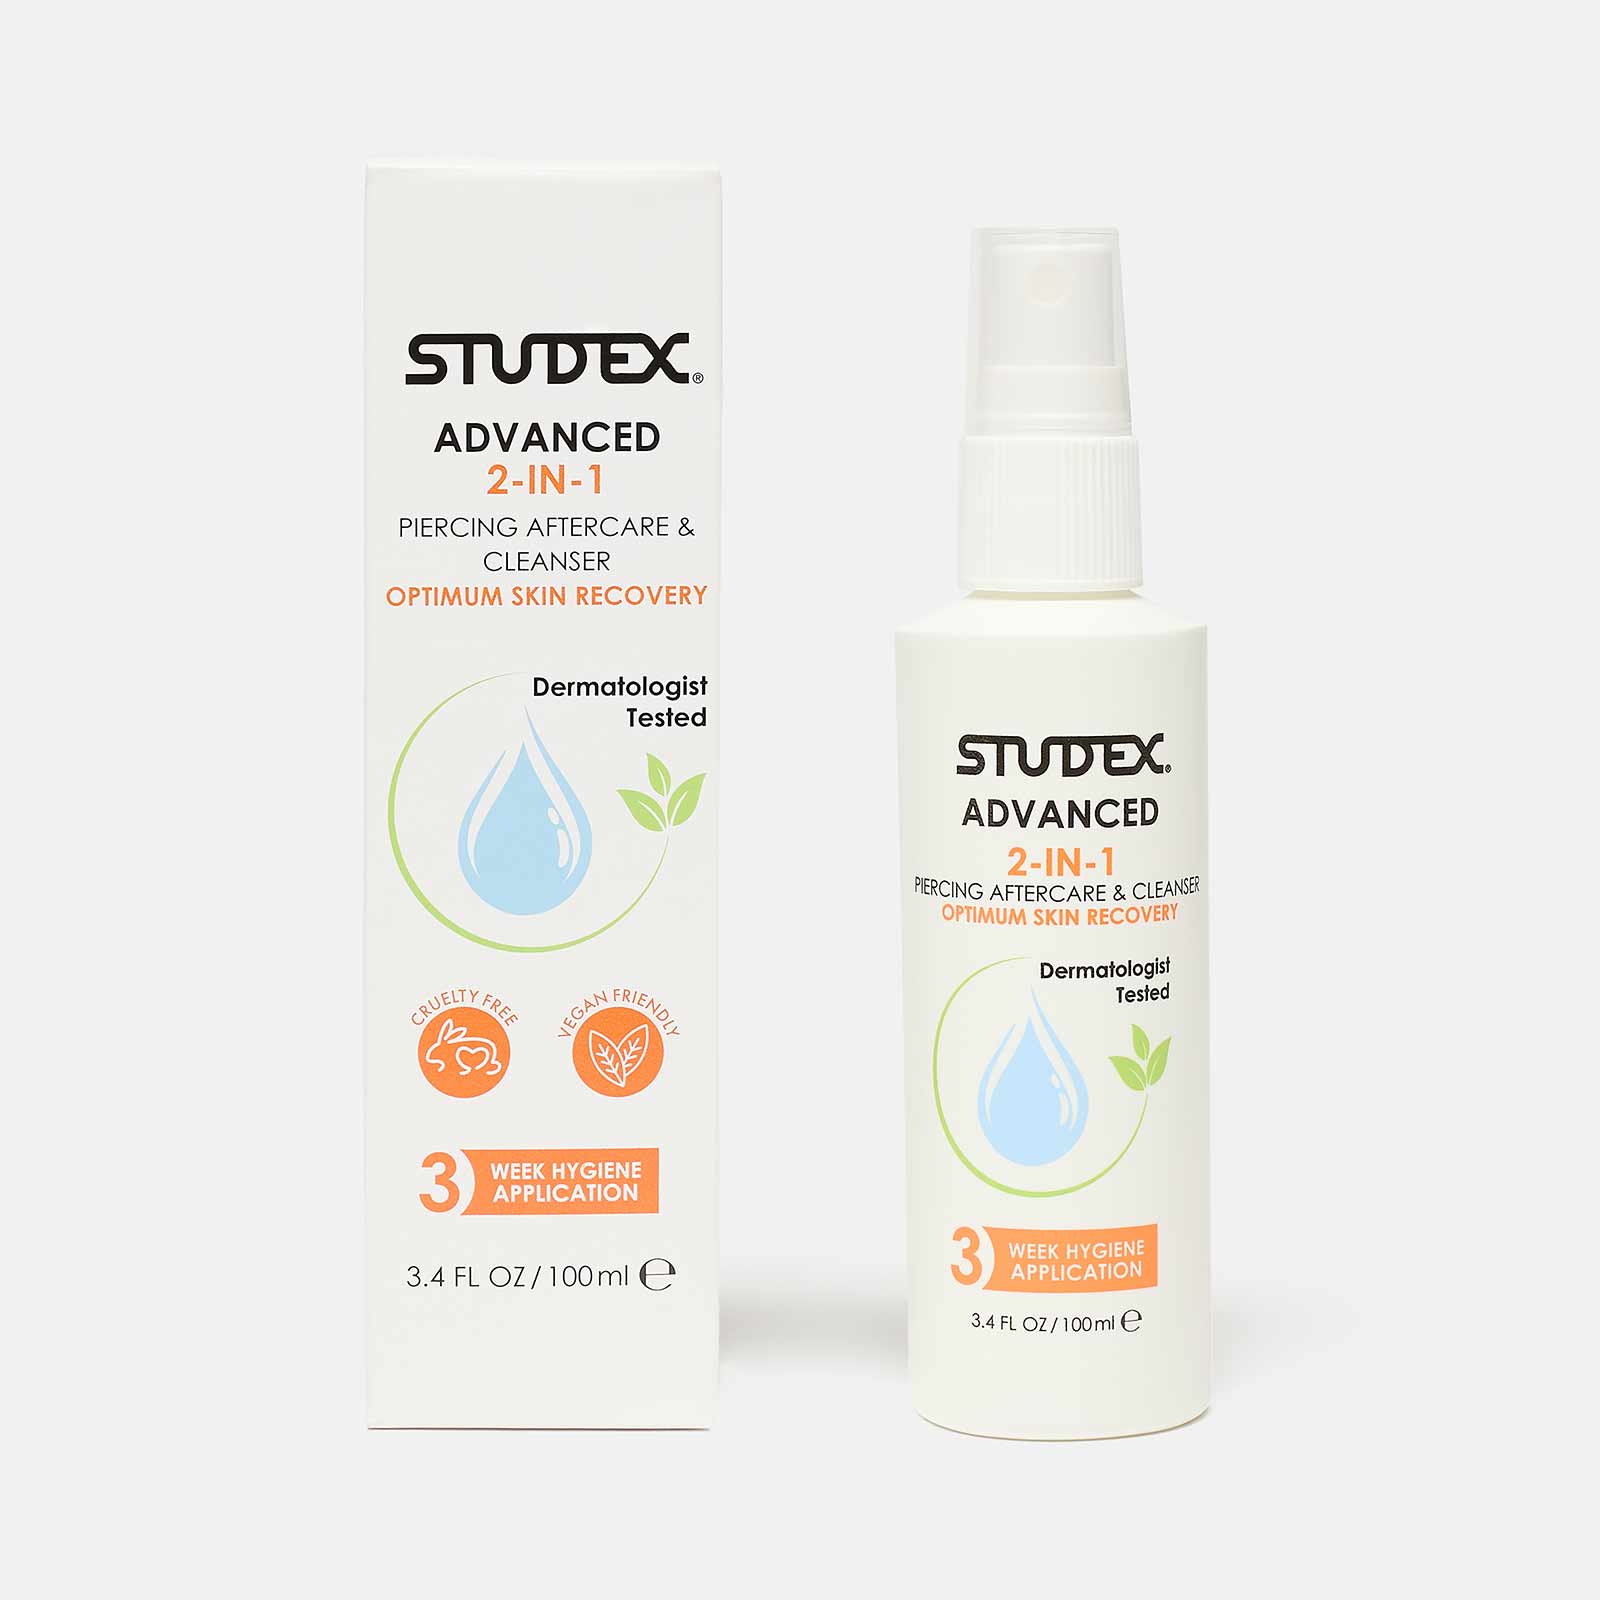 Studex Advanced - Aftercare & Cleanser